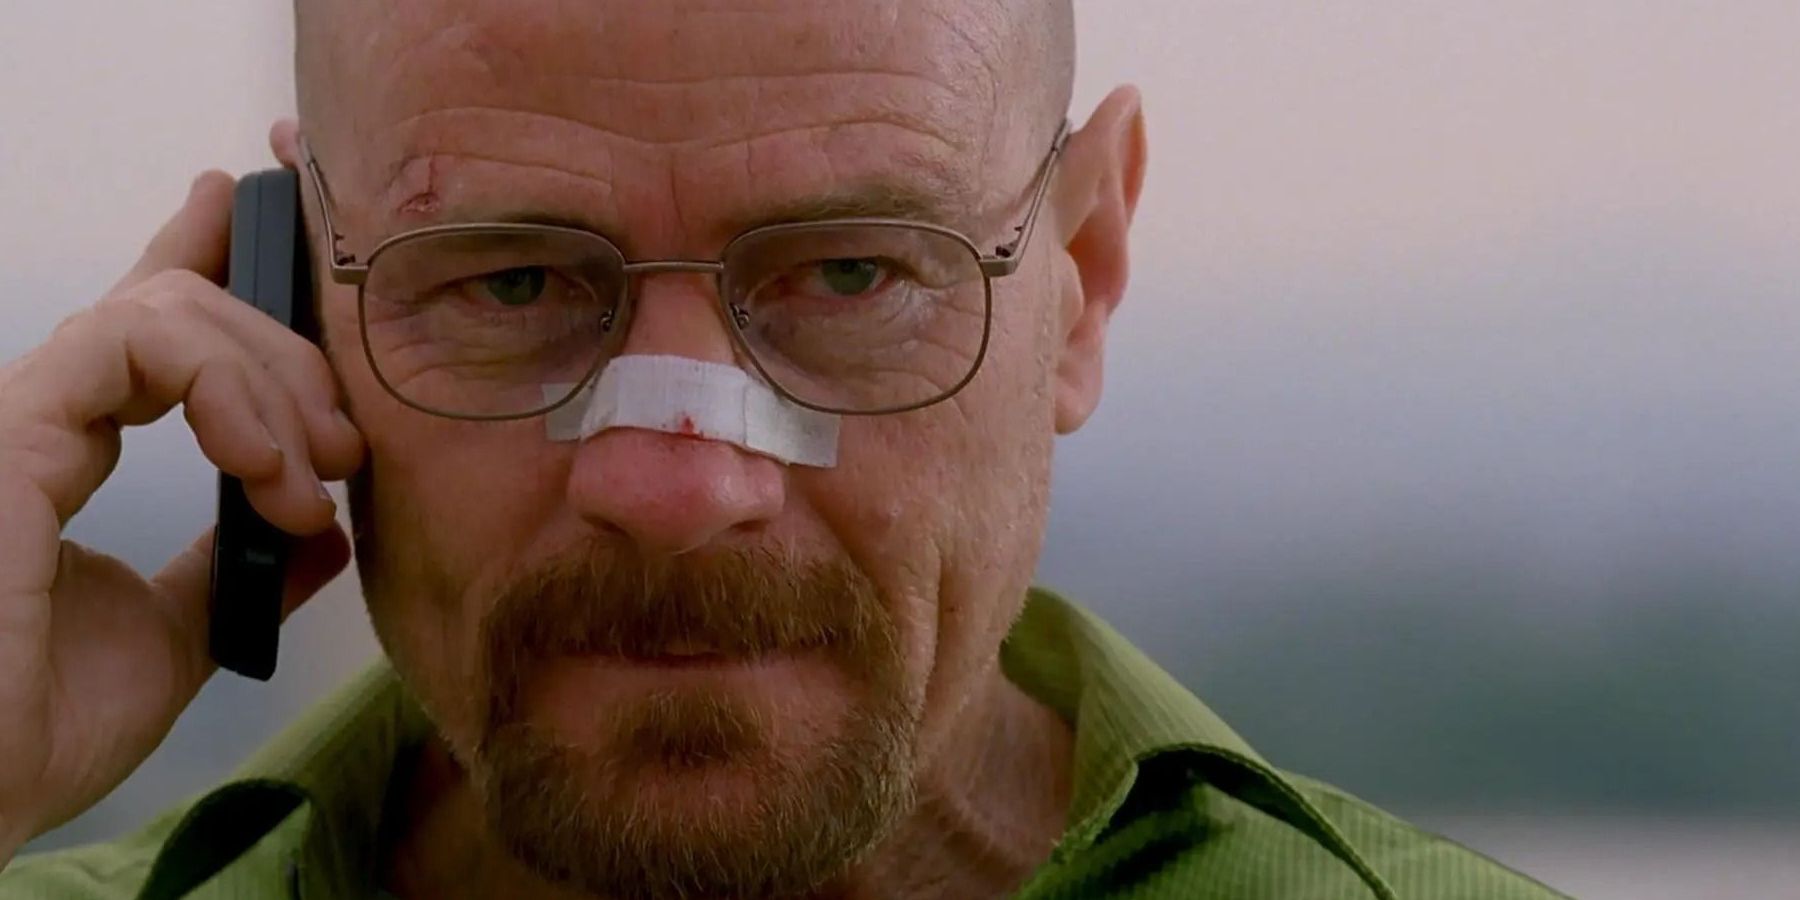 Breaking-Bad-Face-Off (1)